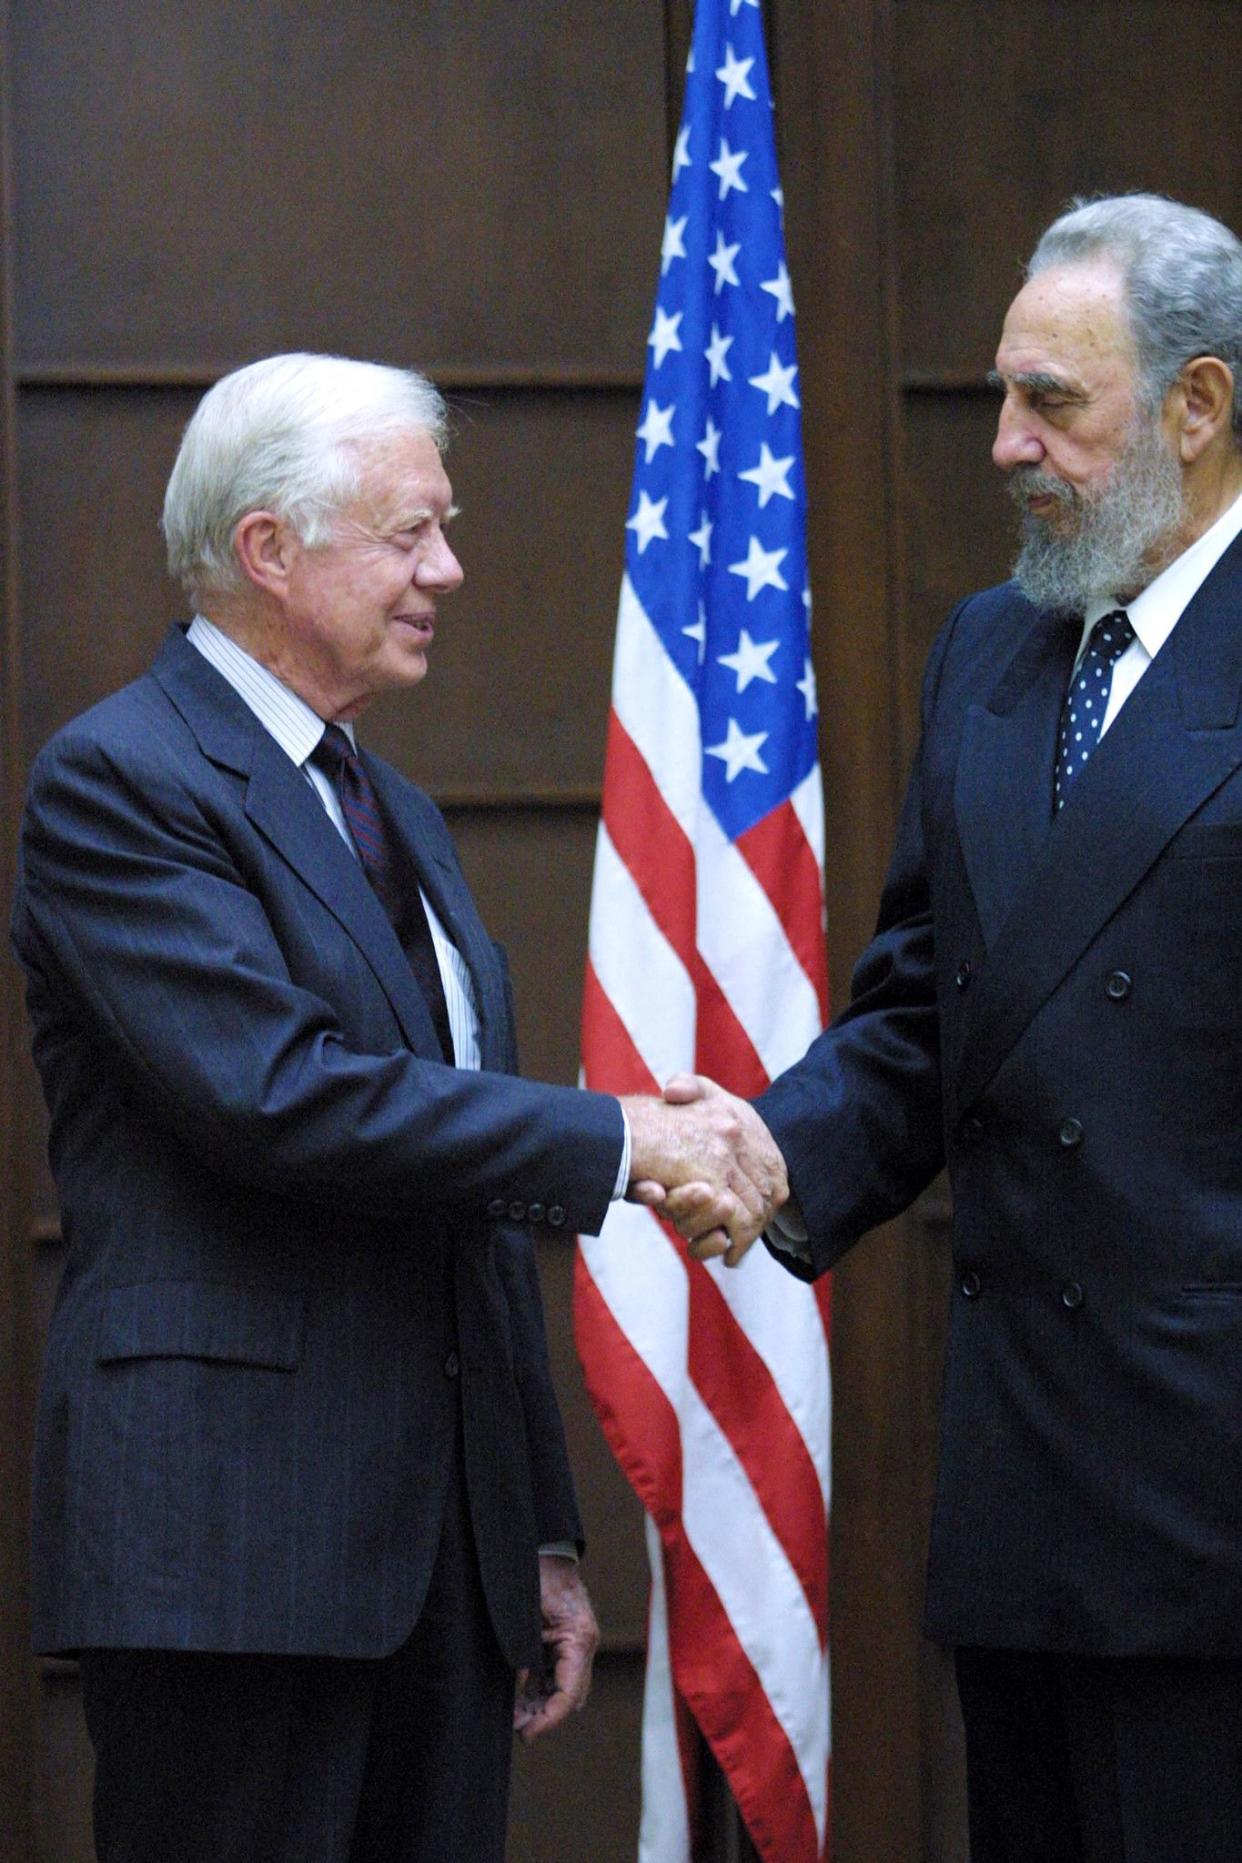 Cuban President Fidel Castro, right, welcomes former President Jimmy Carter to the Revolution Palace on May 12, 2002, on the first day of the former president's six-day visit in Havana, Cuba. Former President Carter is the first U.S. president, in or out of office, to visit Cuba since Castro came to power in 1959.